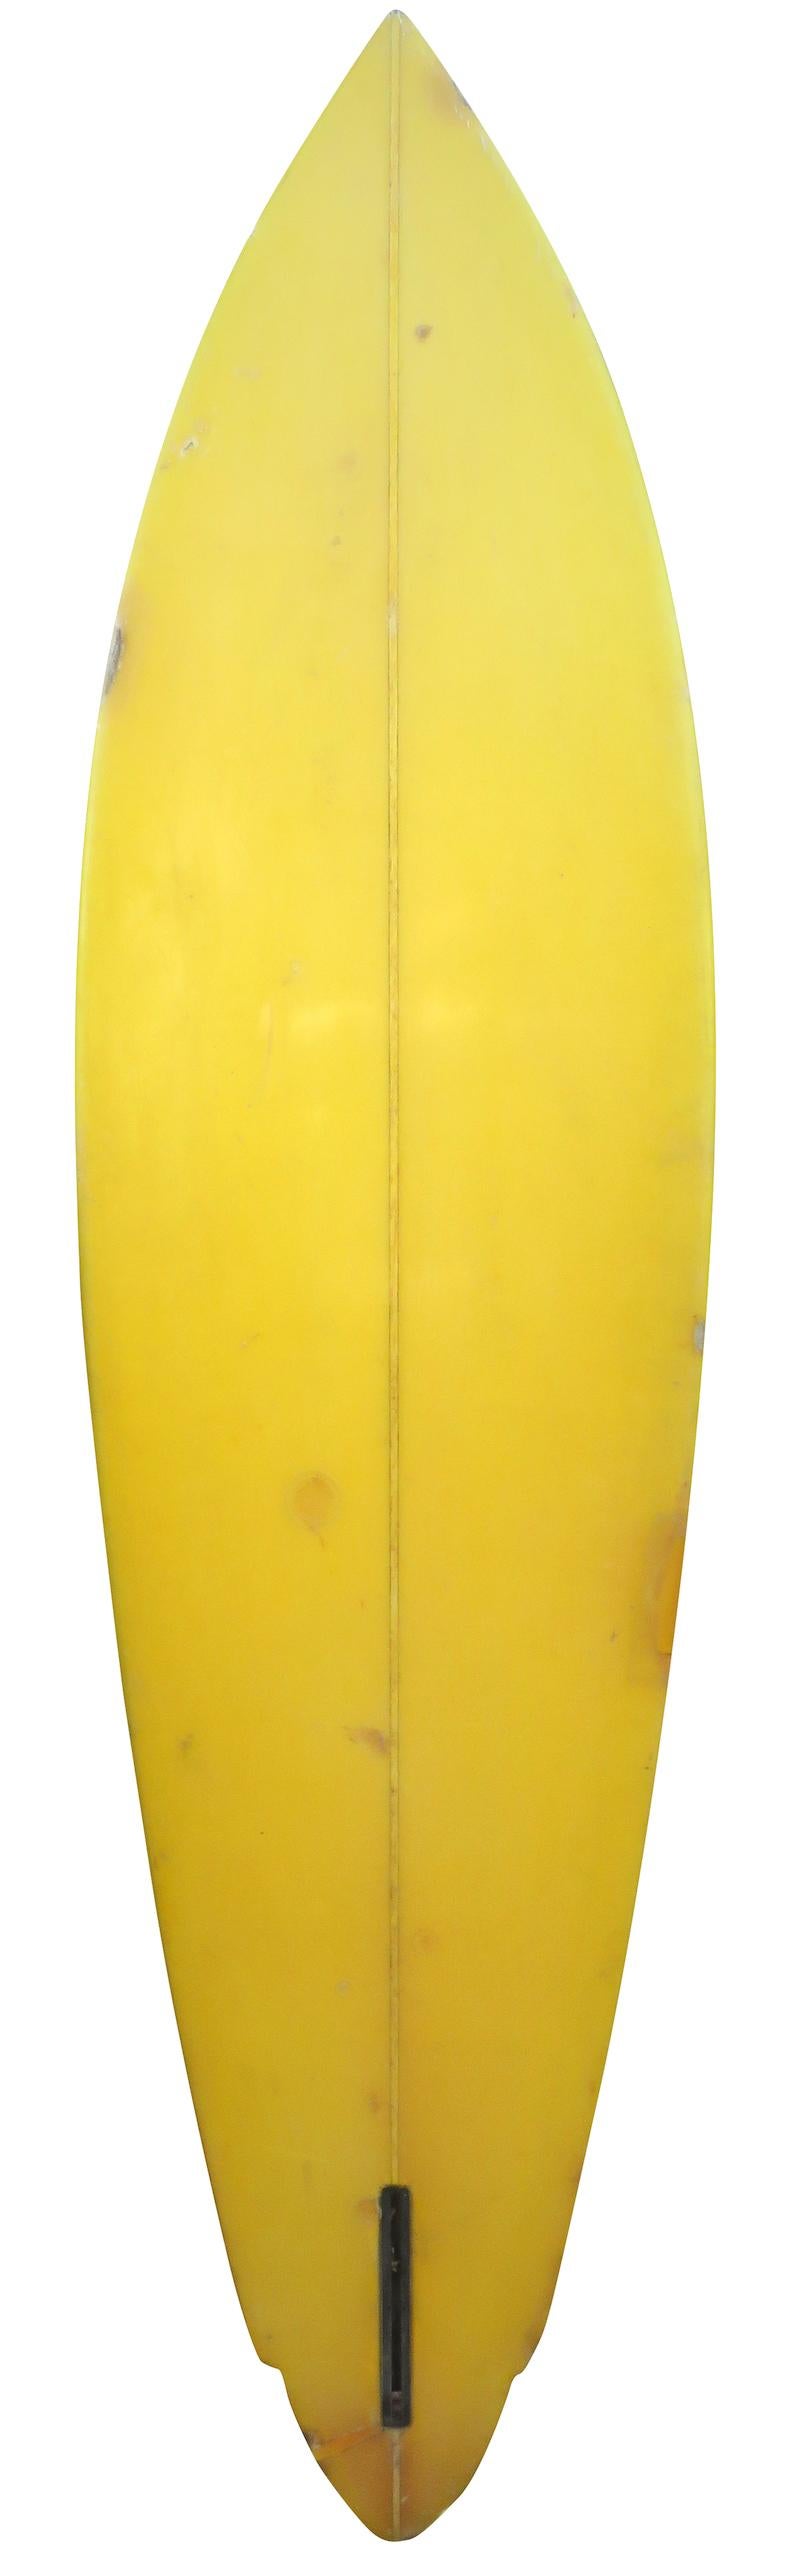 Mid-late 1970s ET surfboards winged pintail surfboard. Features an airbrush fade on deck with yellow tinted bottom and lightning bolt design on the rails. A great example of a 1970s surfboard in all original condition.